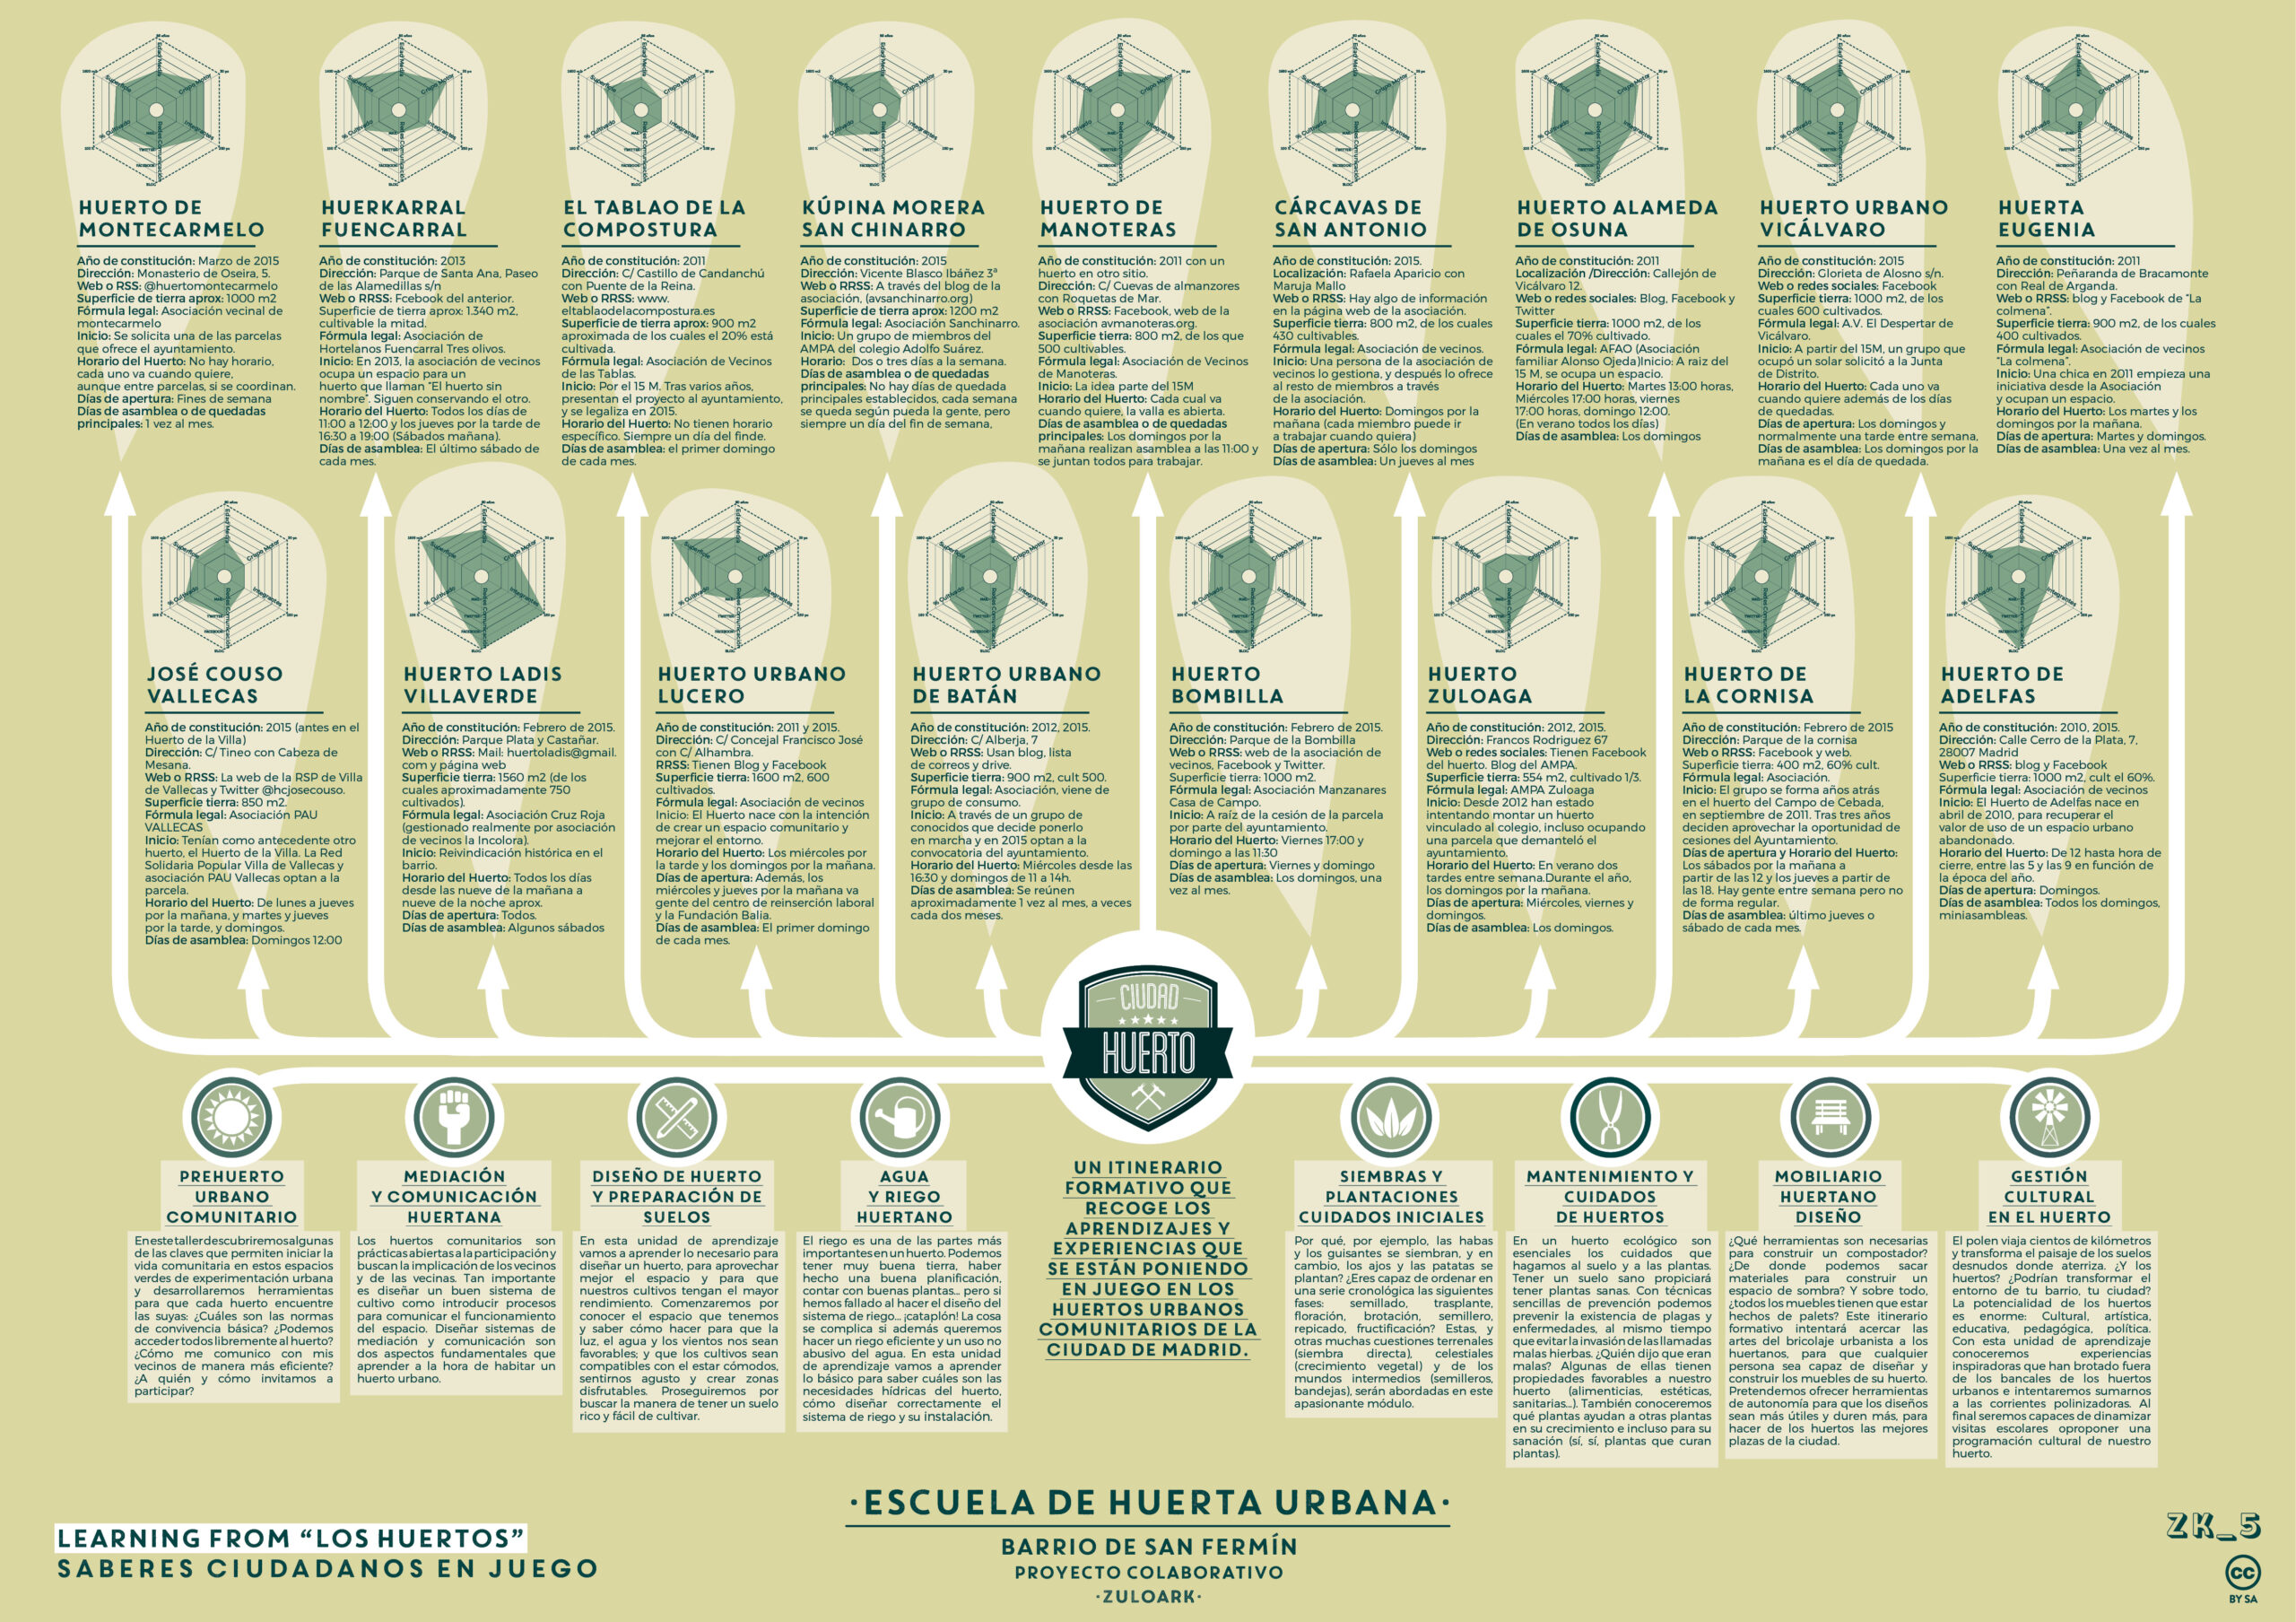 Huerta Escuela: Learning From Citizens - Zuloark. Learning from "Los Huertos". Diagram showing the learning from the citizens taking care of urban gardens in Madrid. Illustration by Zuloark